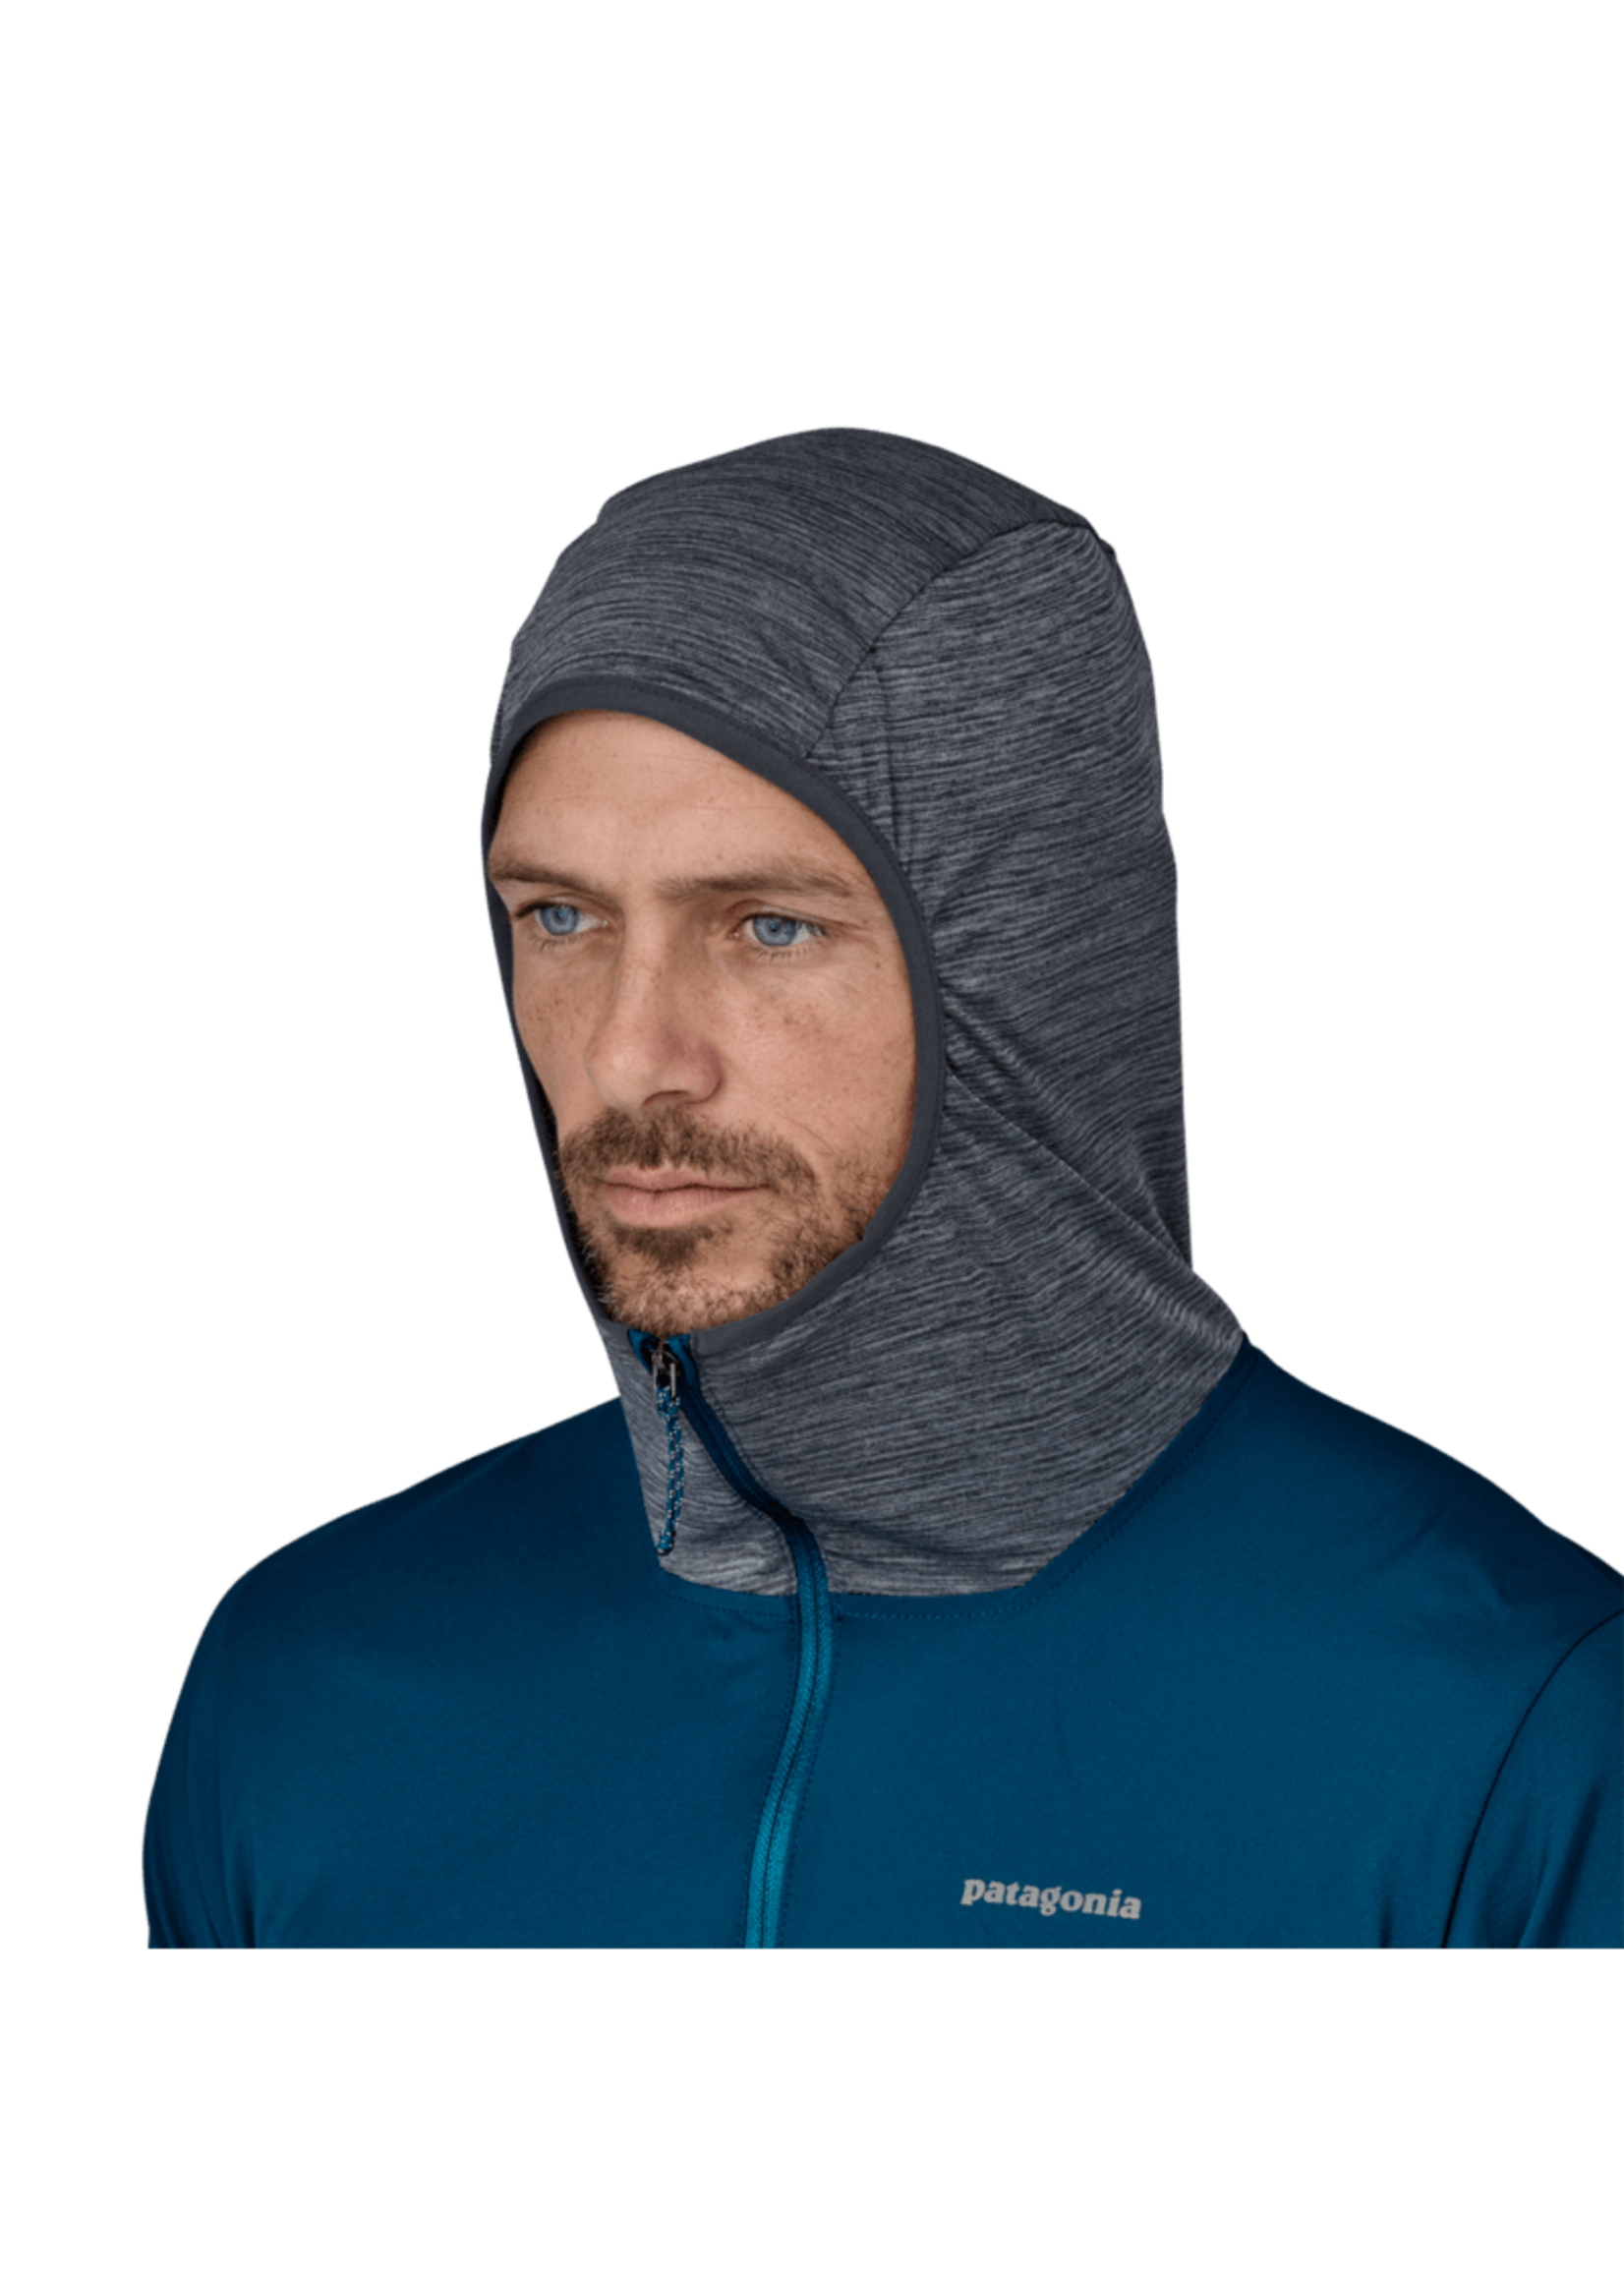 Patagonia Men's Airshed Pro Pullover - Lagom Blue